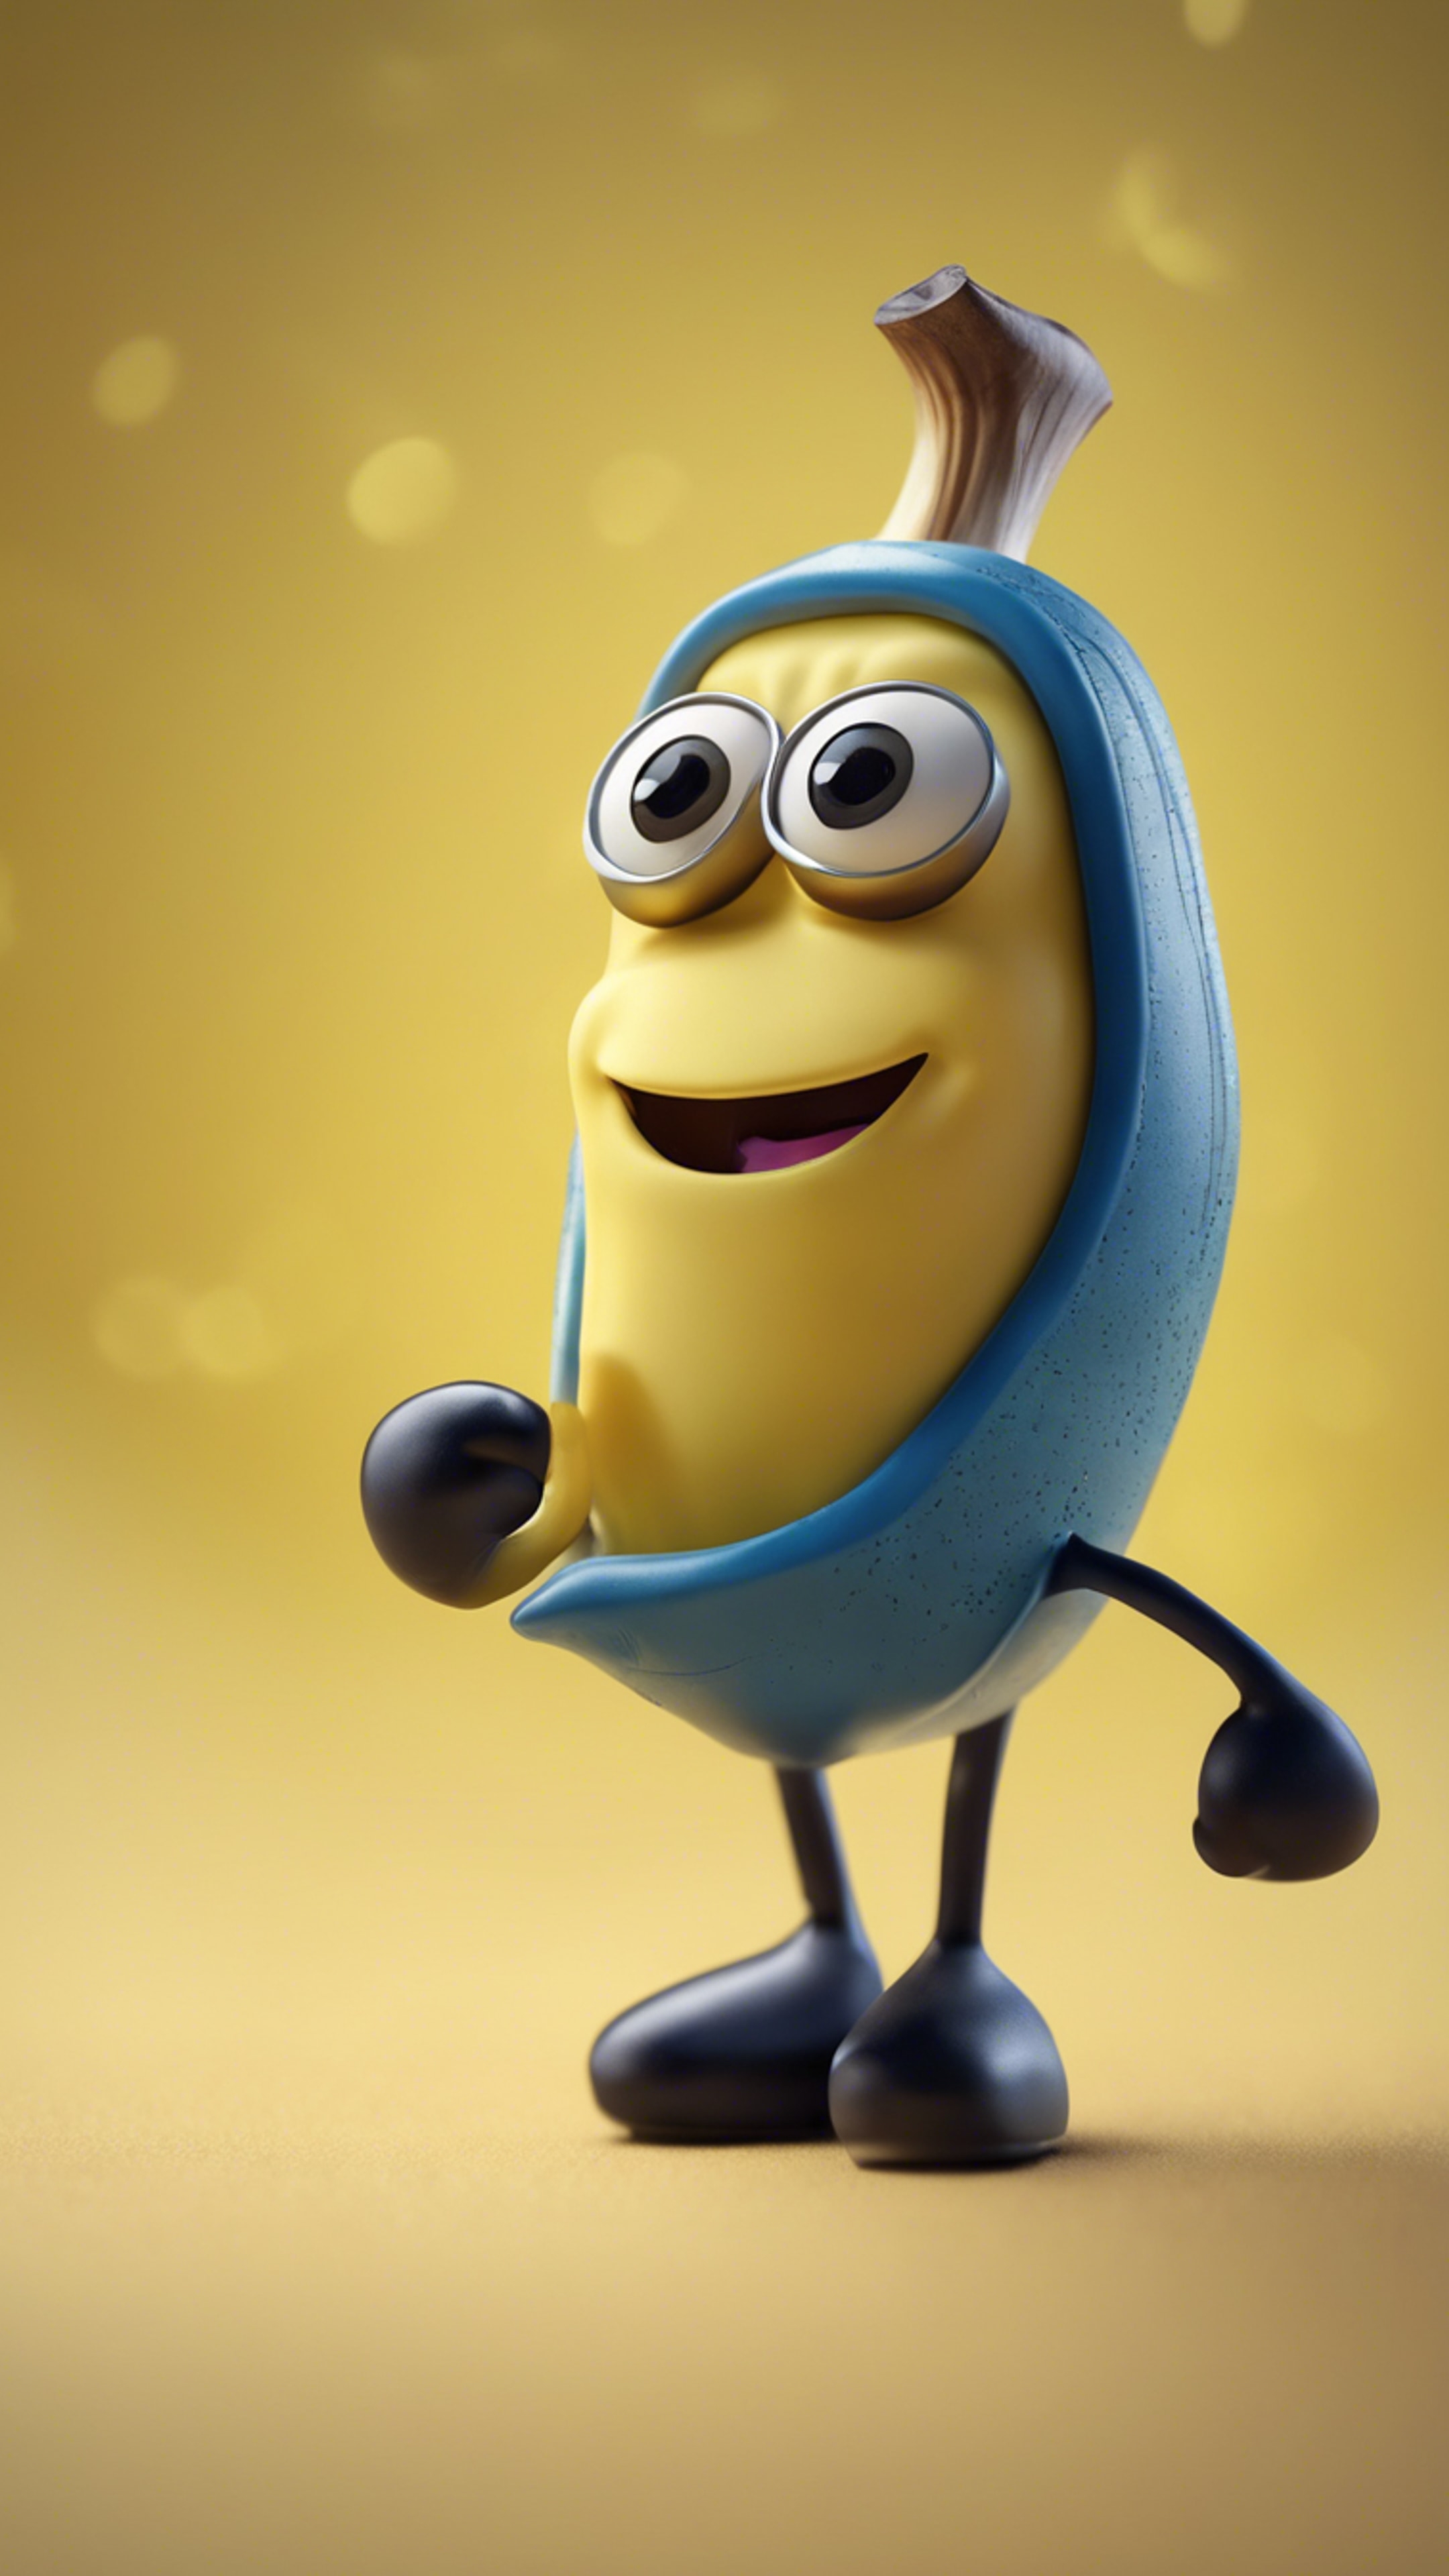 A banana animated character in a kids TV show. Ფონი[134047b32d7e4822af7d]